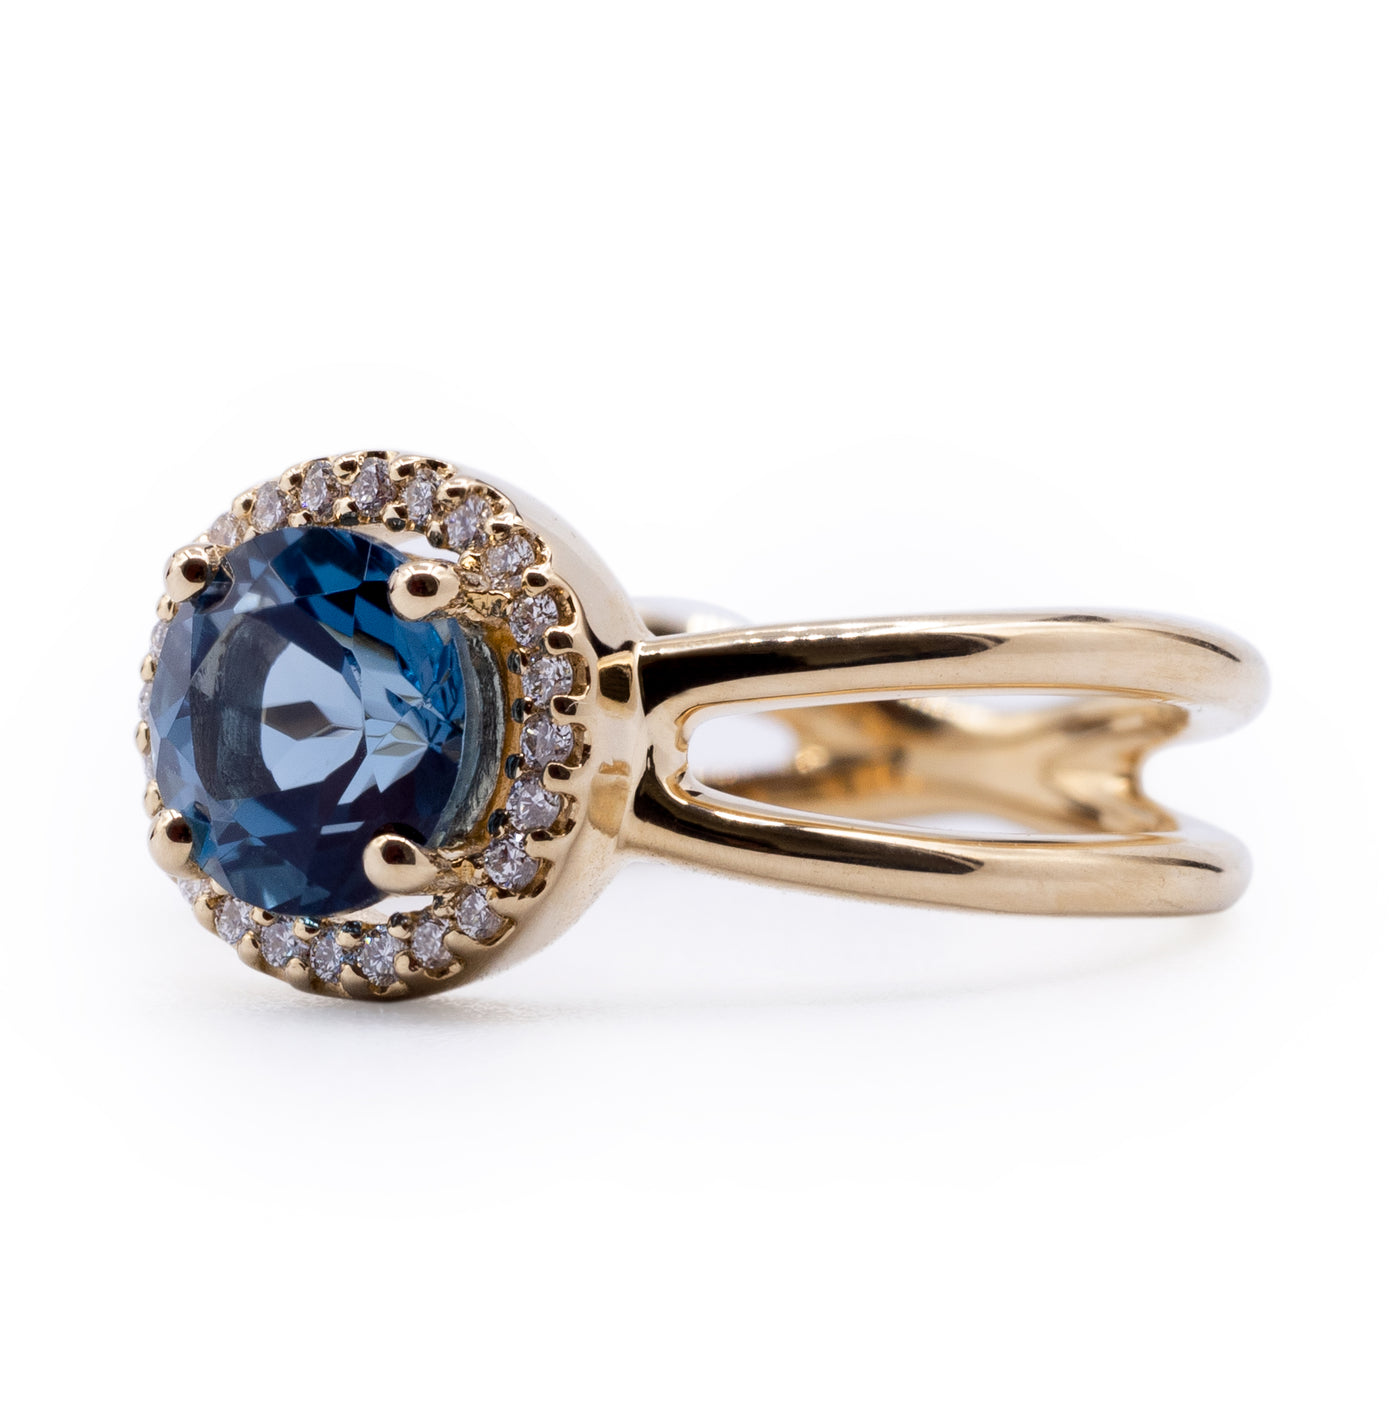 Round London Blue Topaz Setting with Diamond Accented Halo and Criss Cross Shank Ring